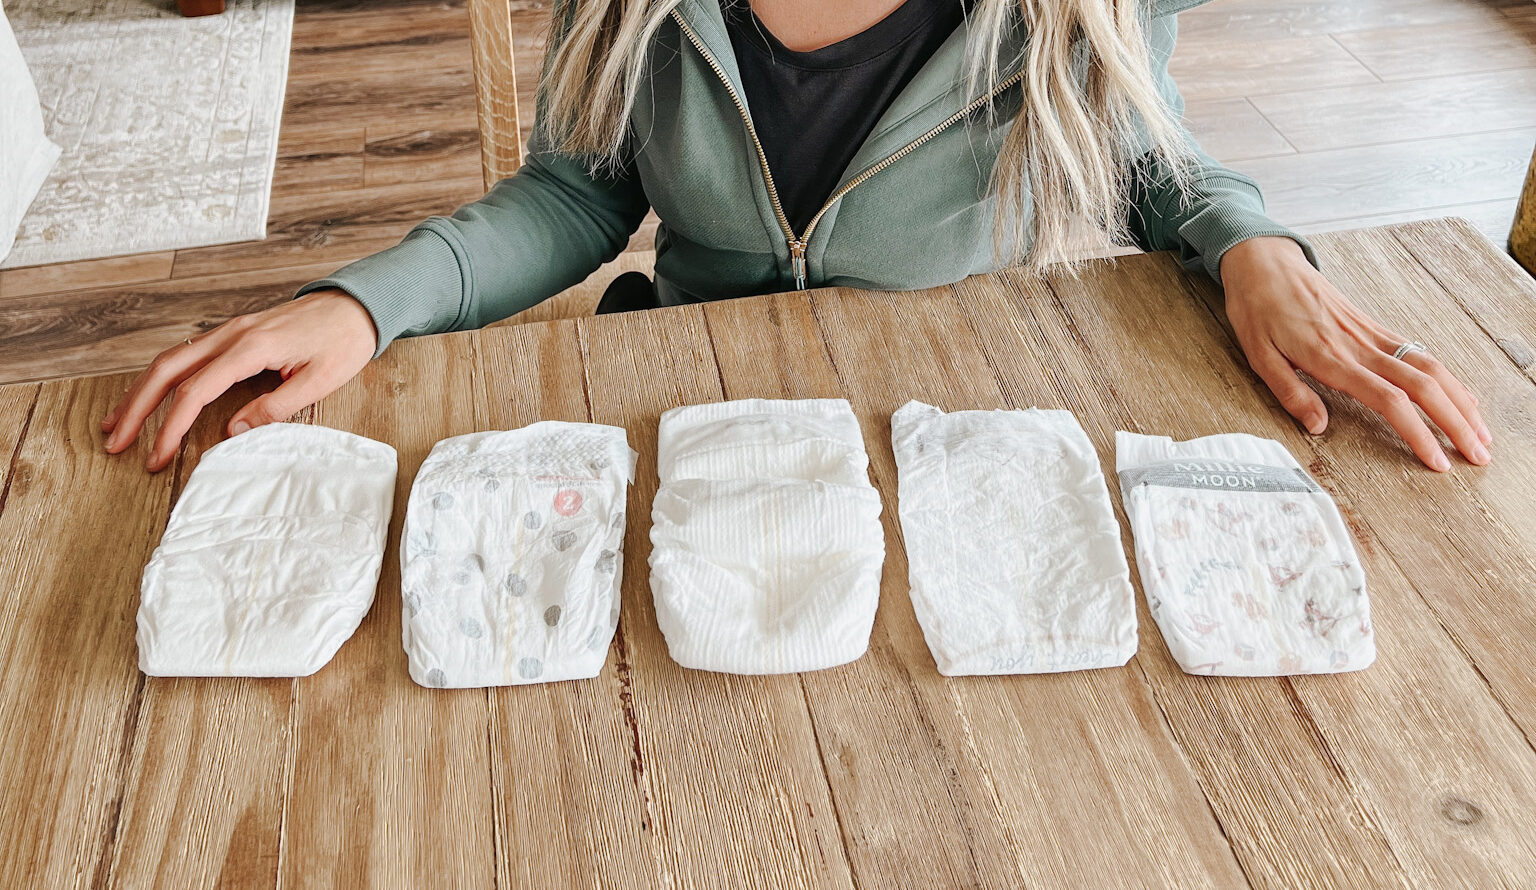 greenest and cleanest diapers